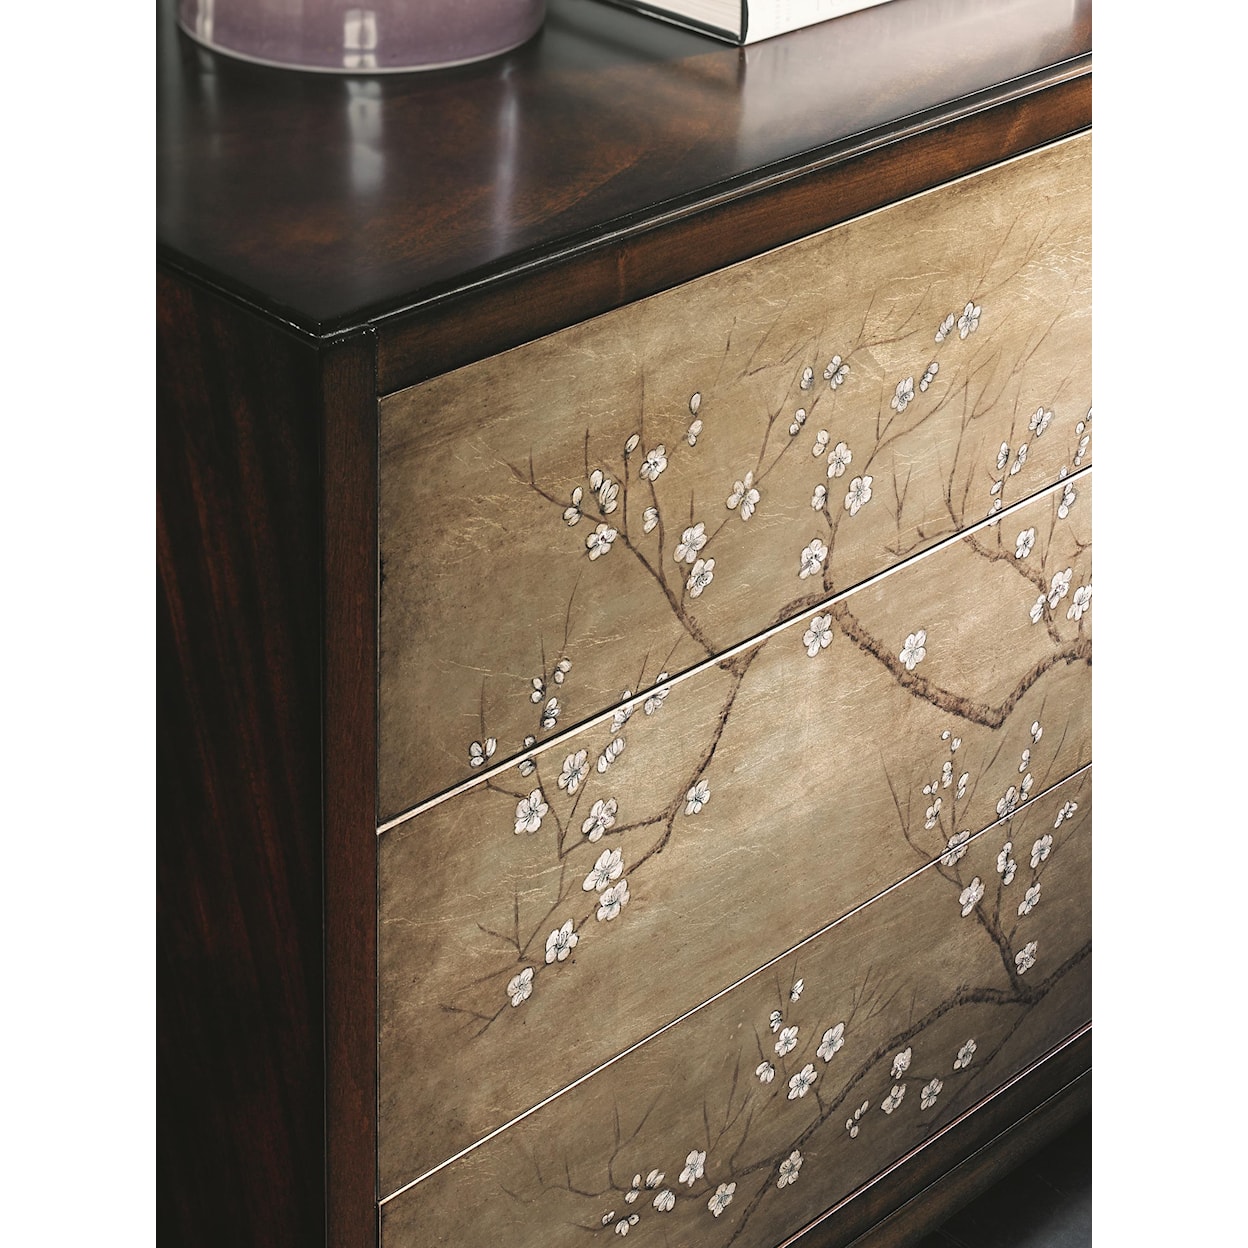 Caracole Caracole Classic Awesome Blossom Accent Chest